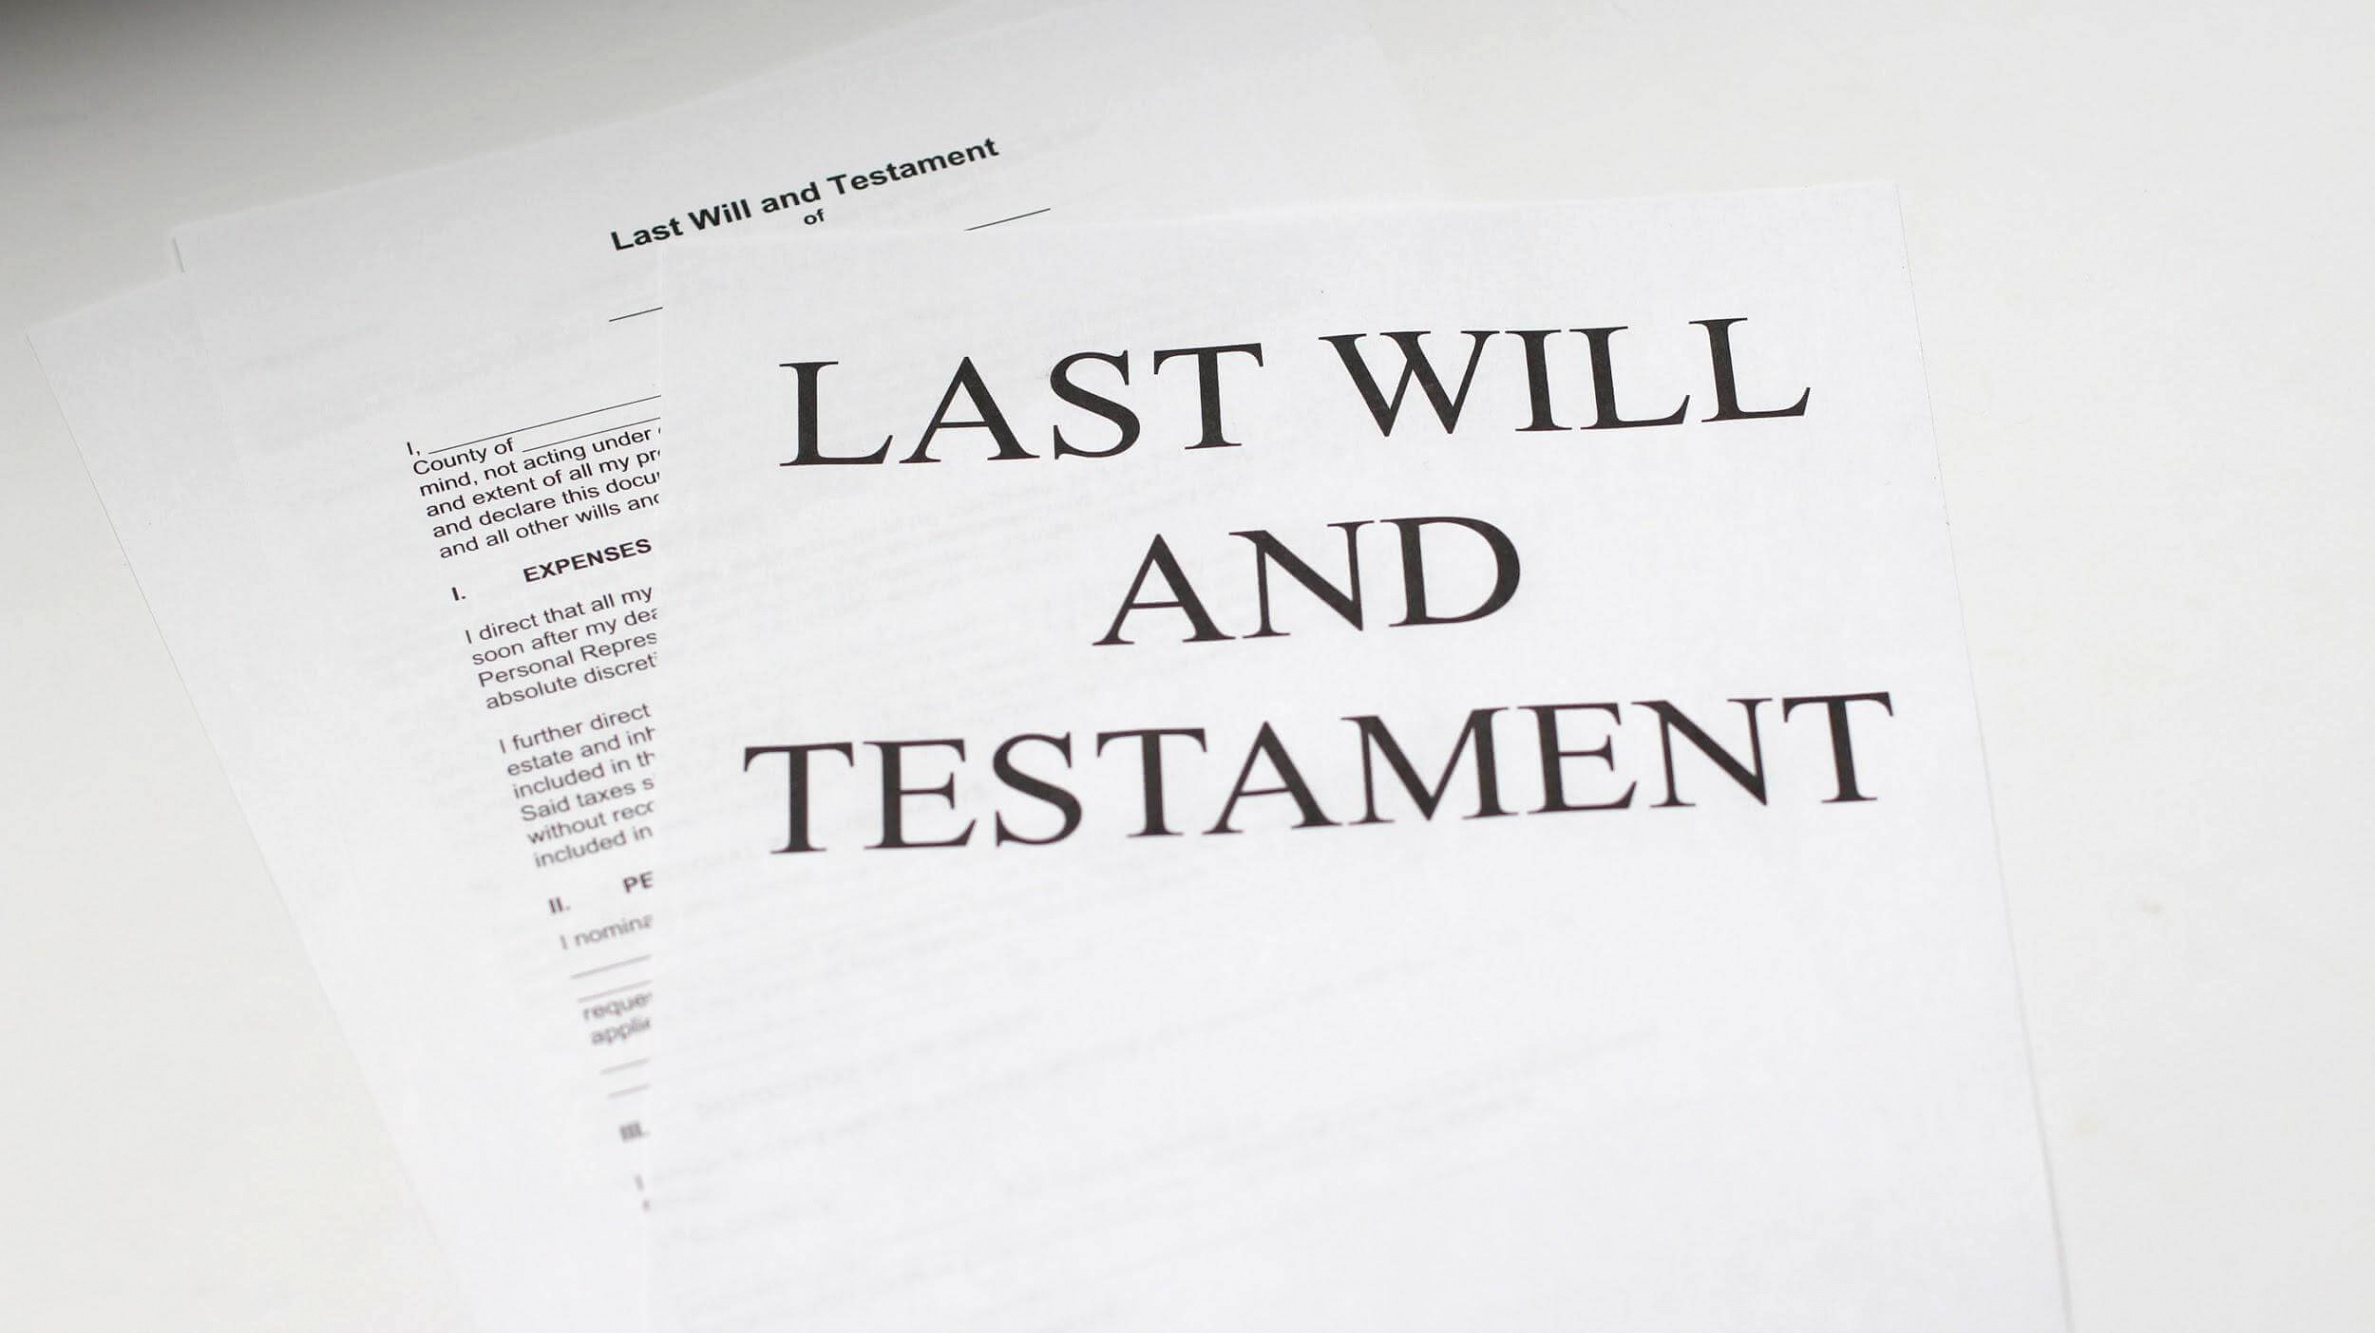 probate without a will